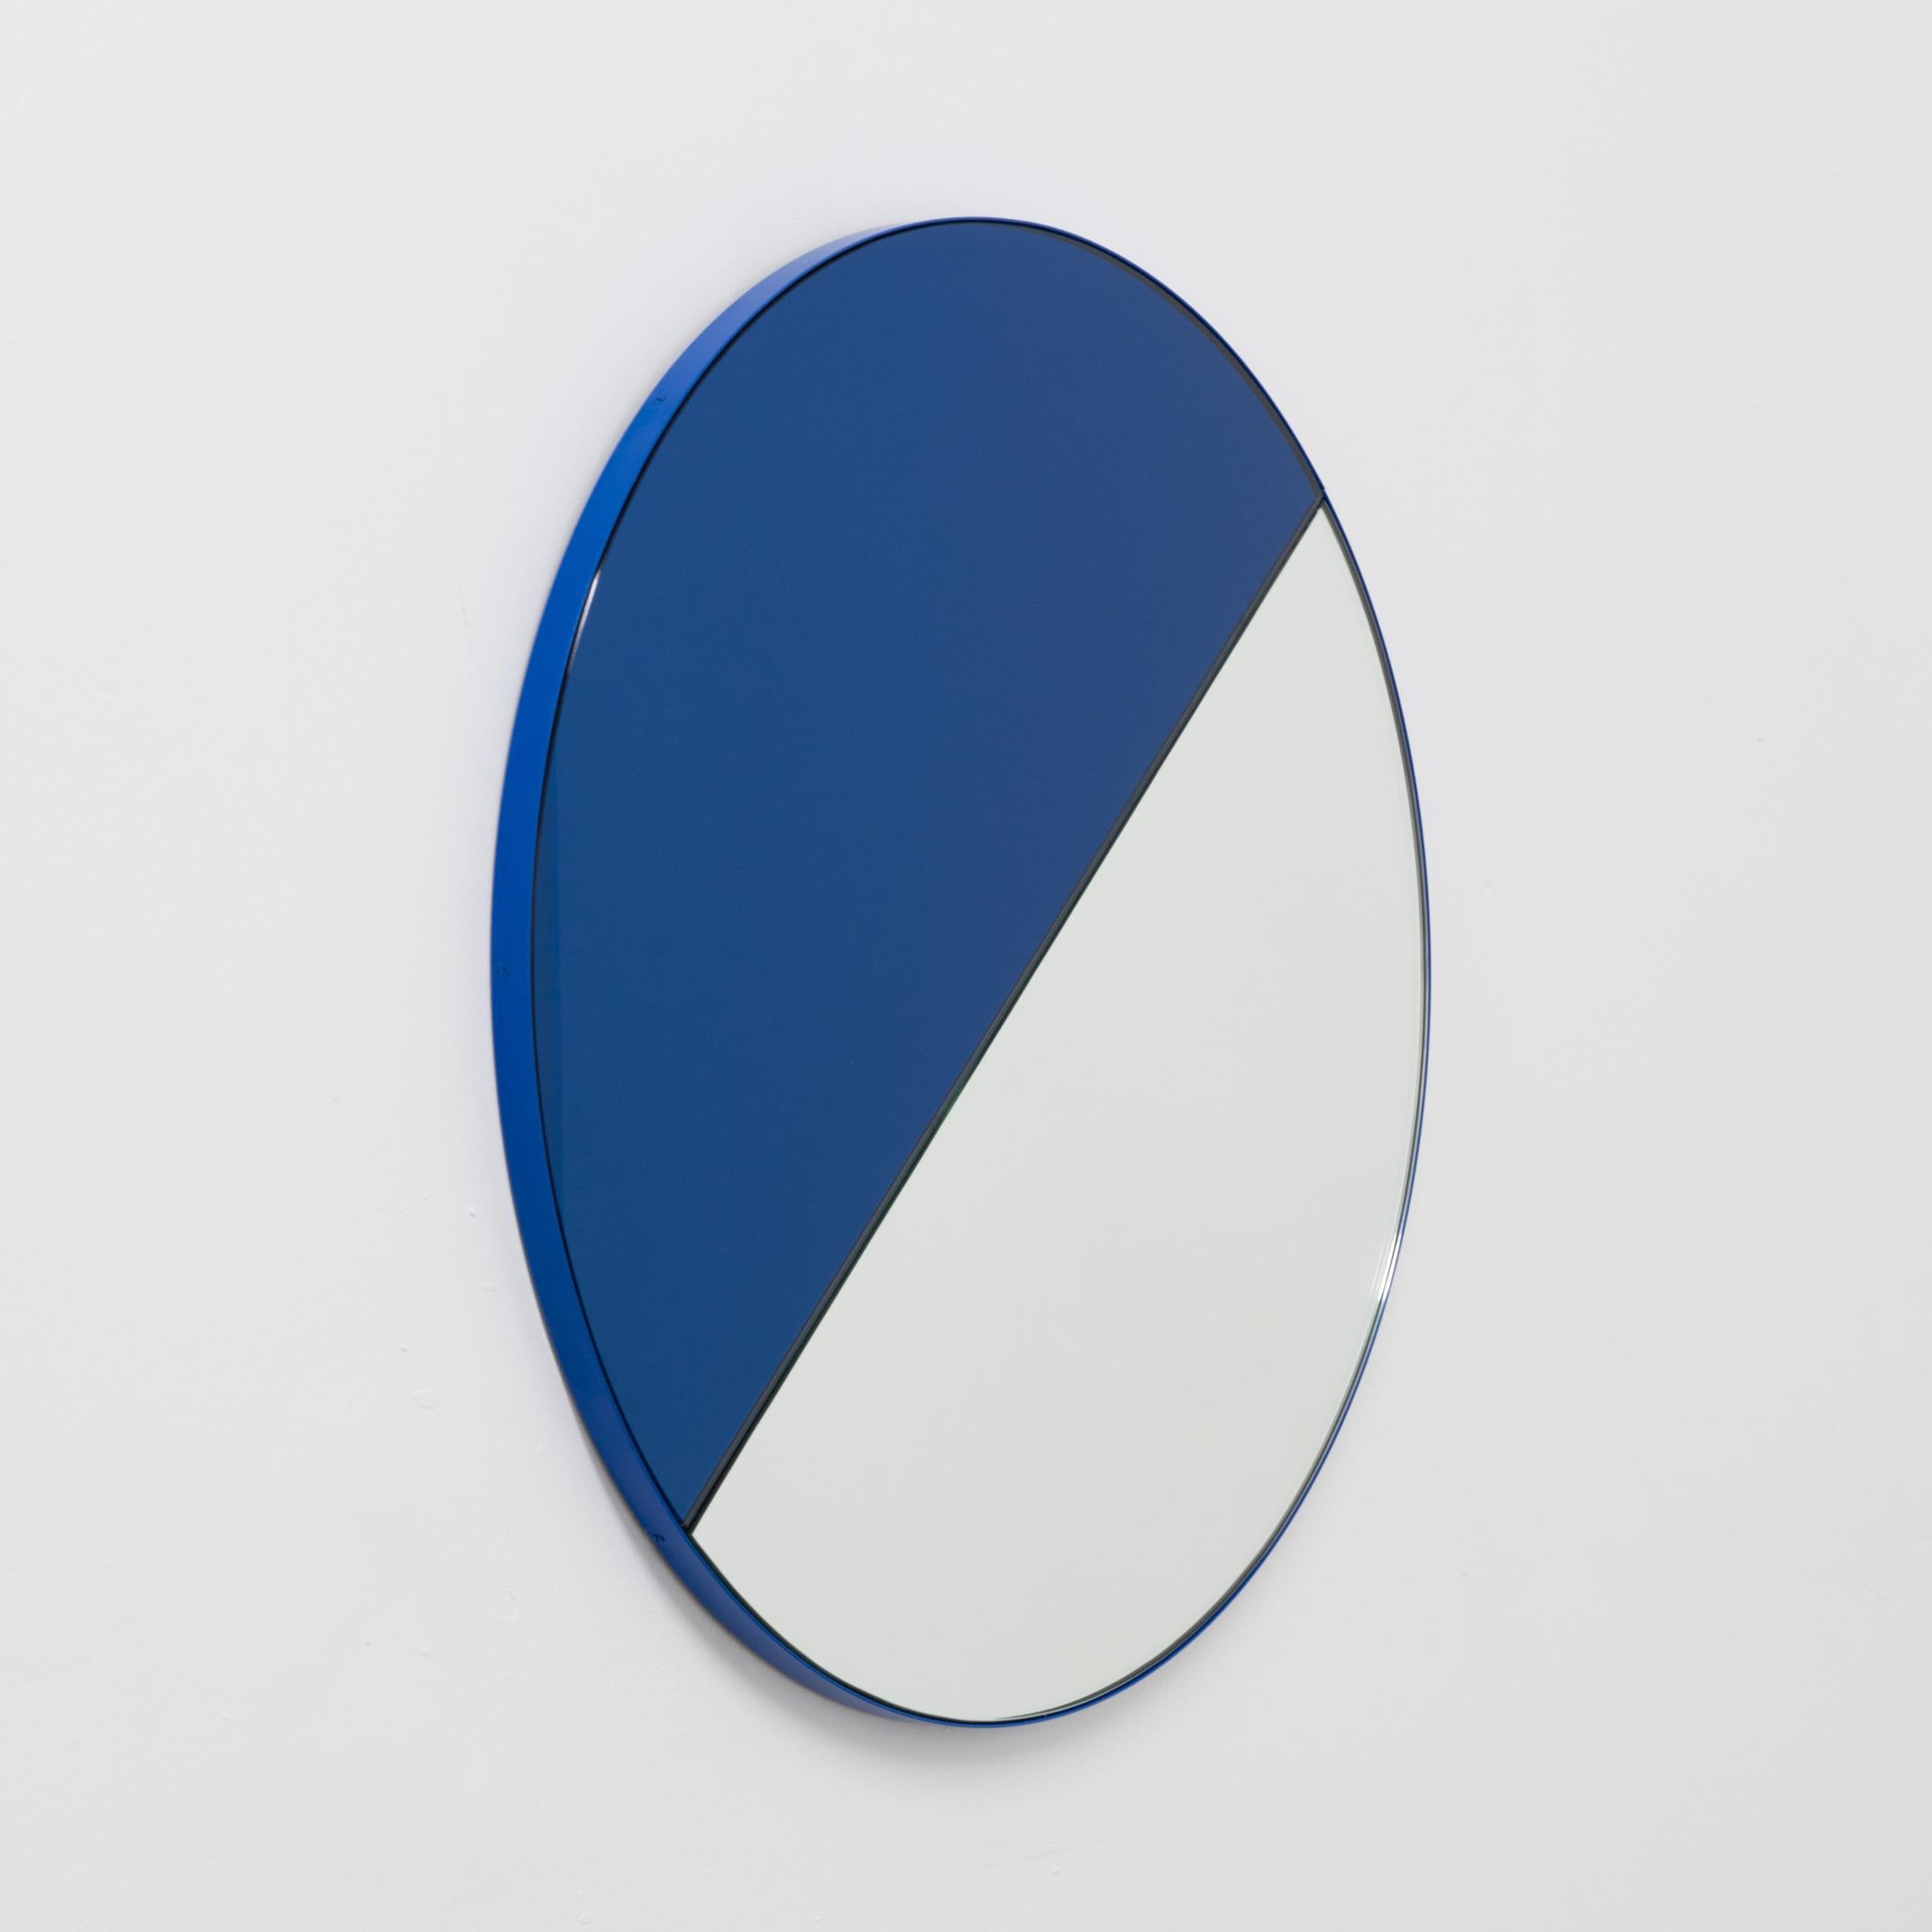 Orbis Dualis Contemporary Blue and Silver Round Mirror with Blue Frame, Large For Sale 1